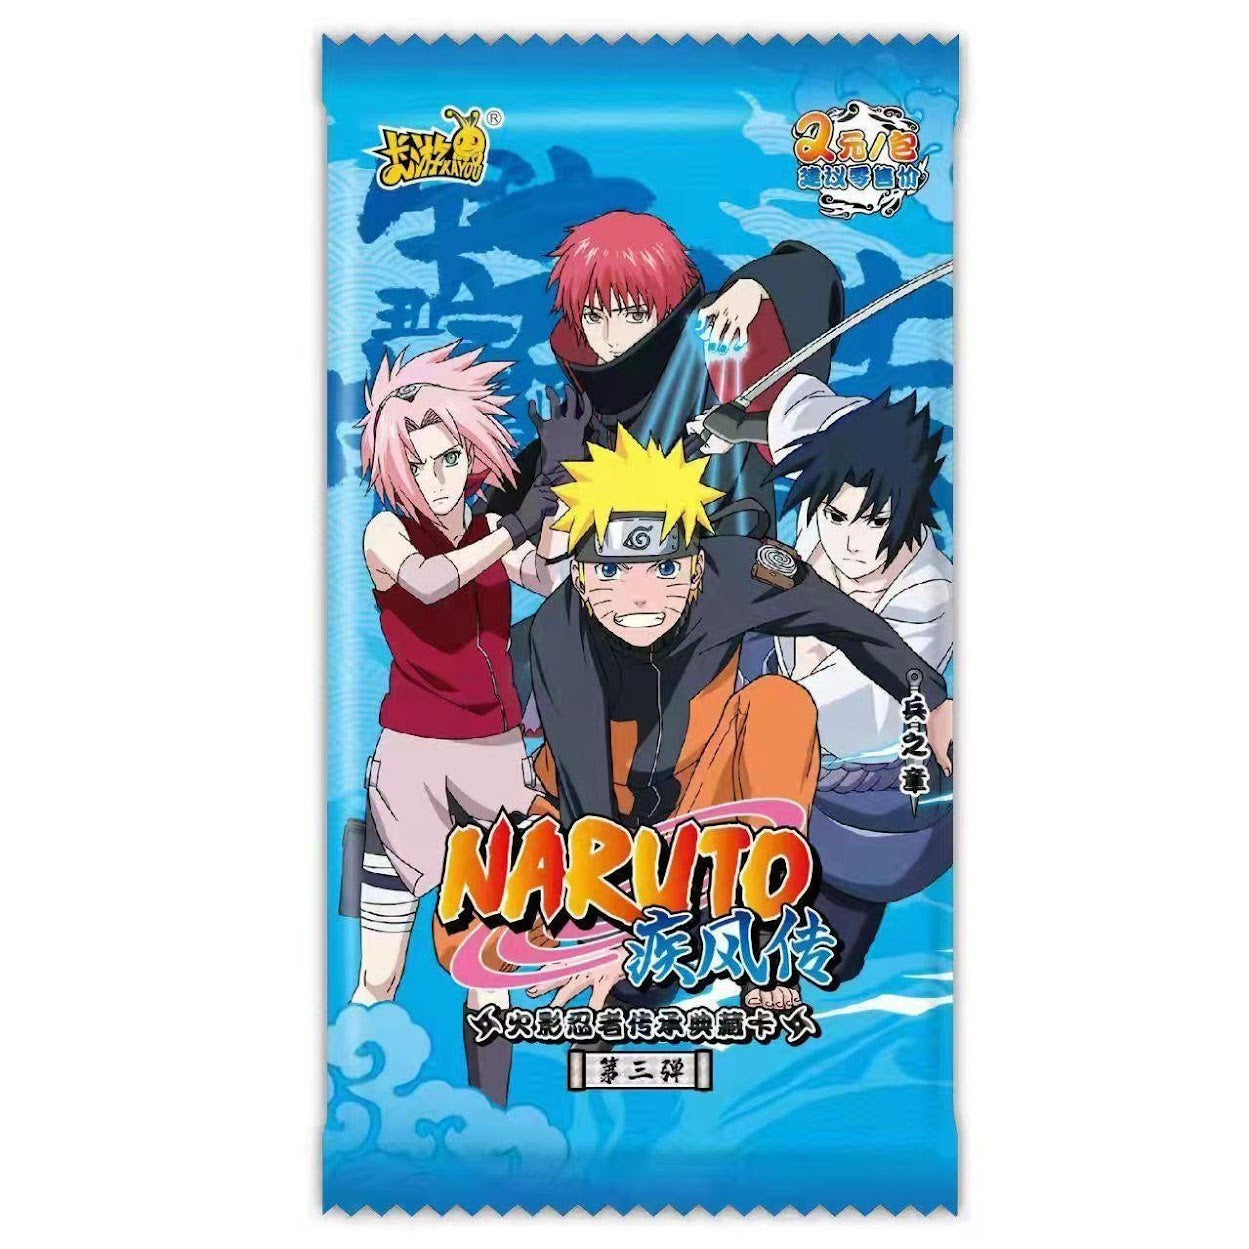 Kayou Naruto Soldier's Chapter Series 3 Booster Pack 卡游